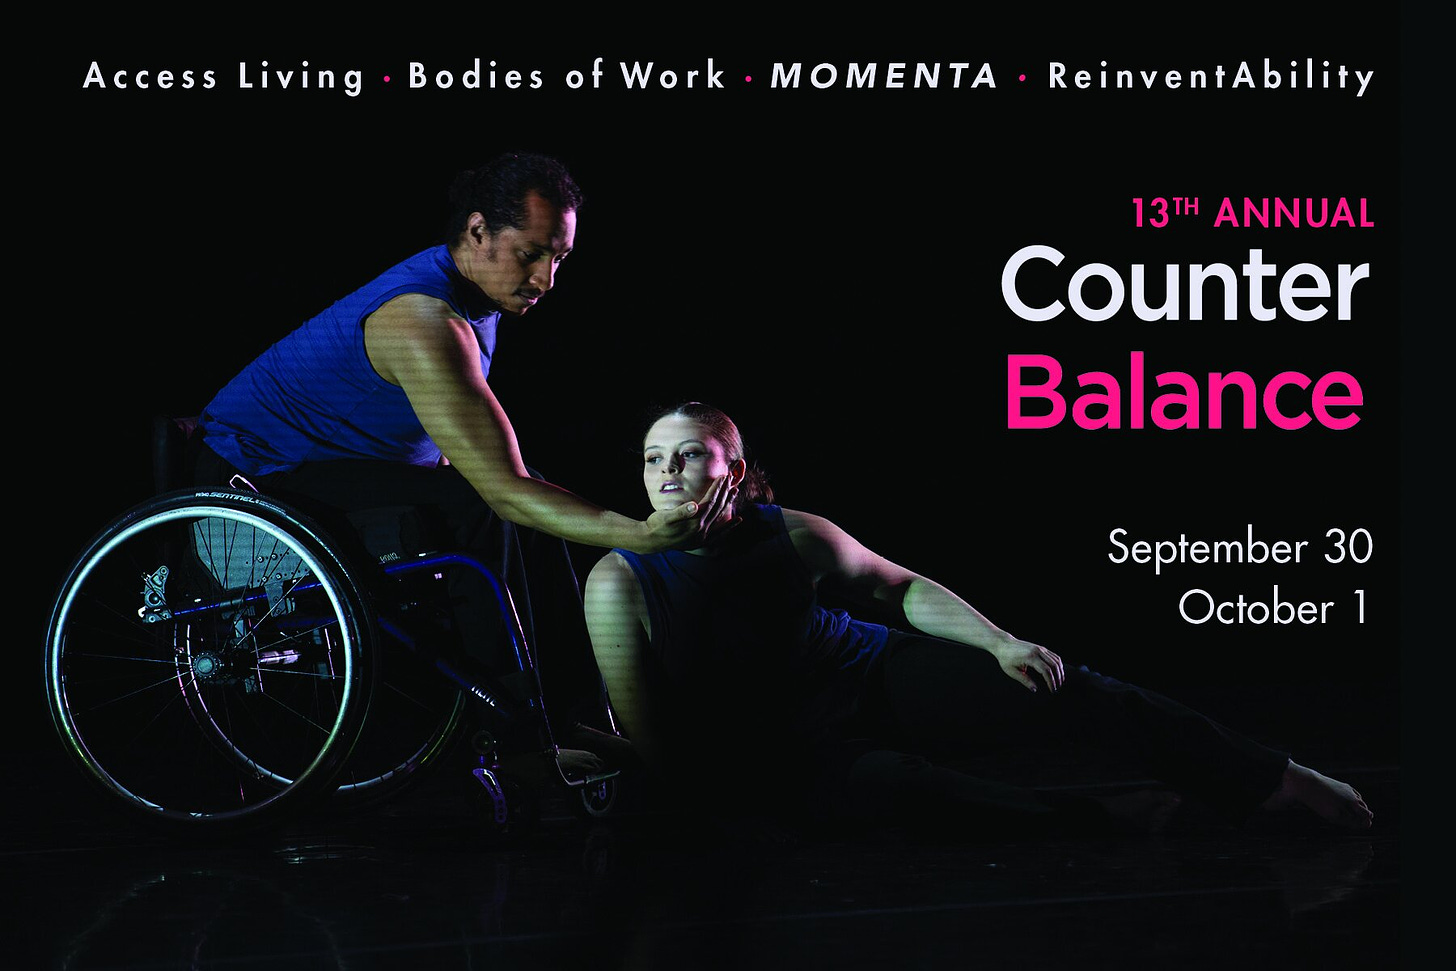 Two dancers, Robby and Tatiana, both wear blue shirts and black pants. Robby, angled towards the right, leans forward in his wheel chair and reaches his right arm towards Tatiana on the floor. Tatiana leans on her side into Robby with her face cupped